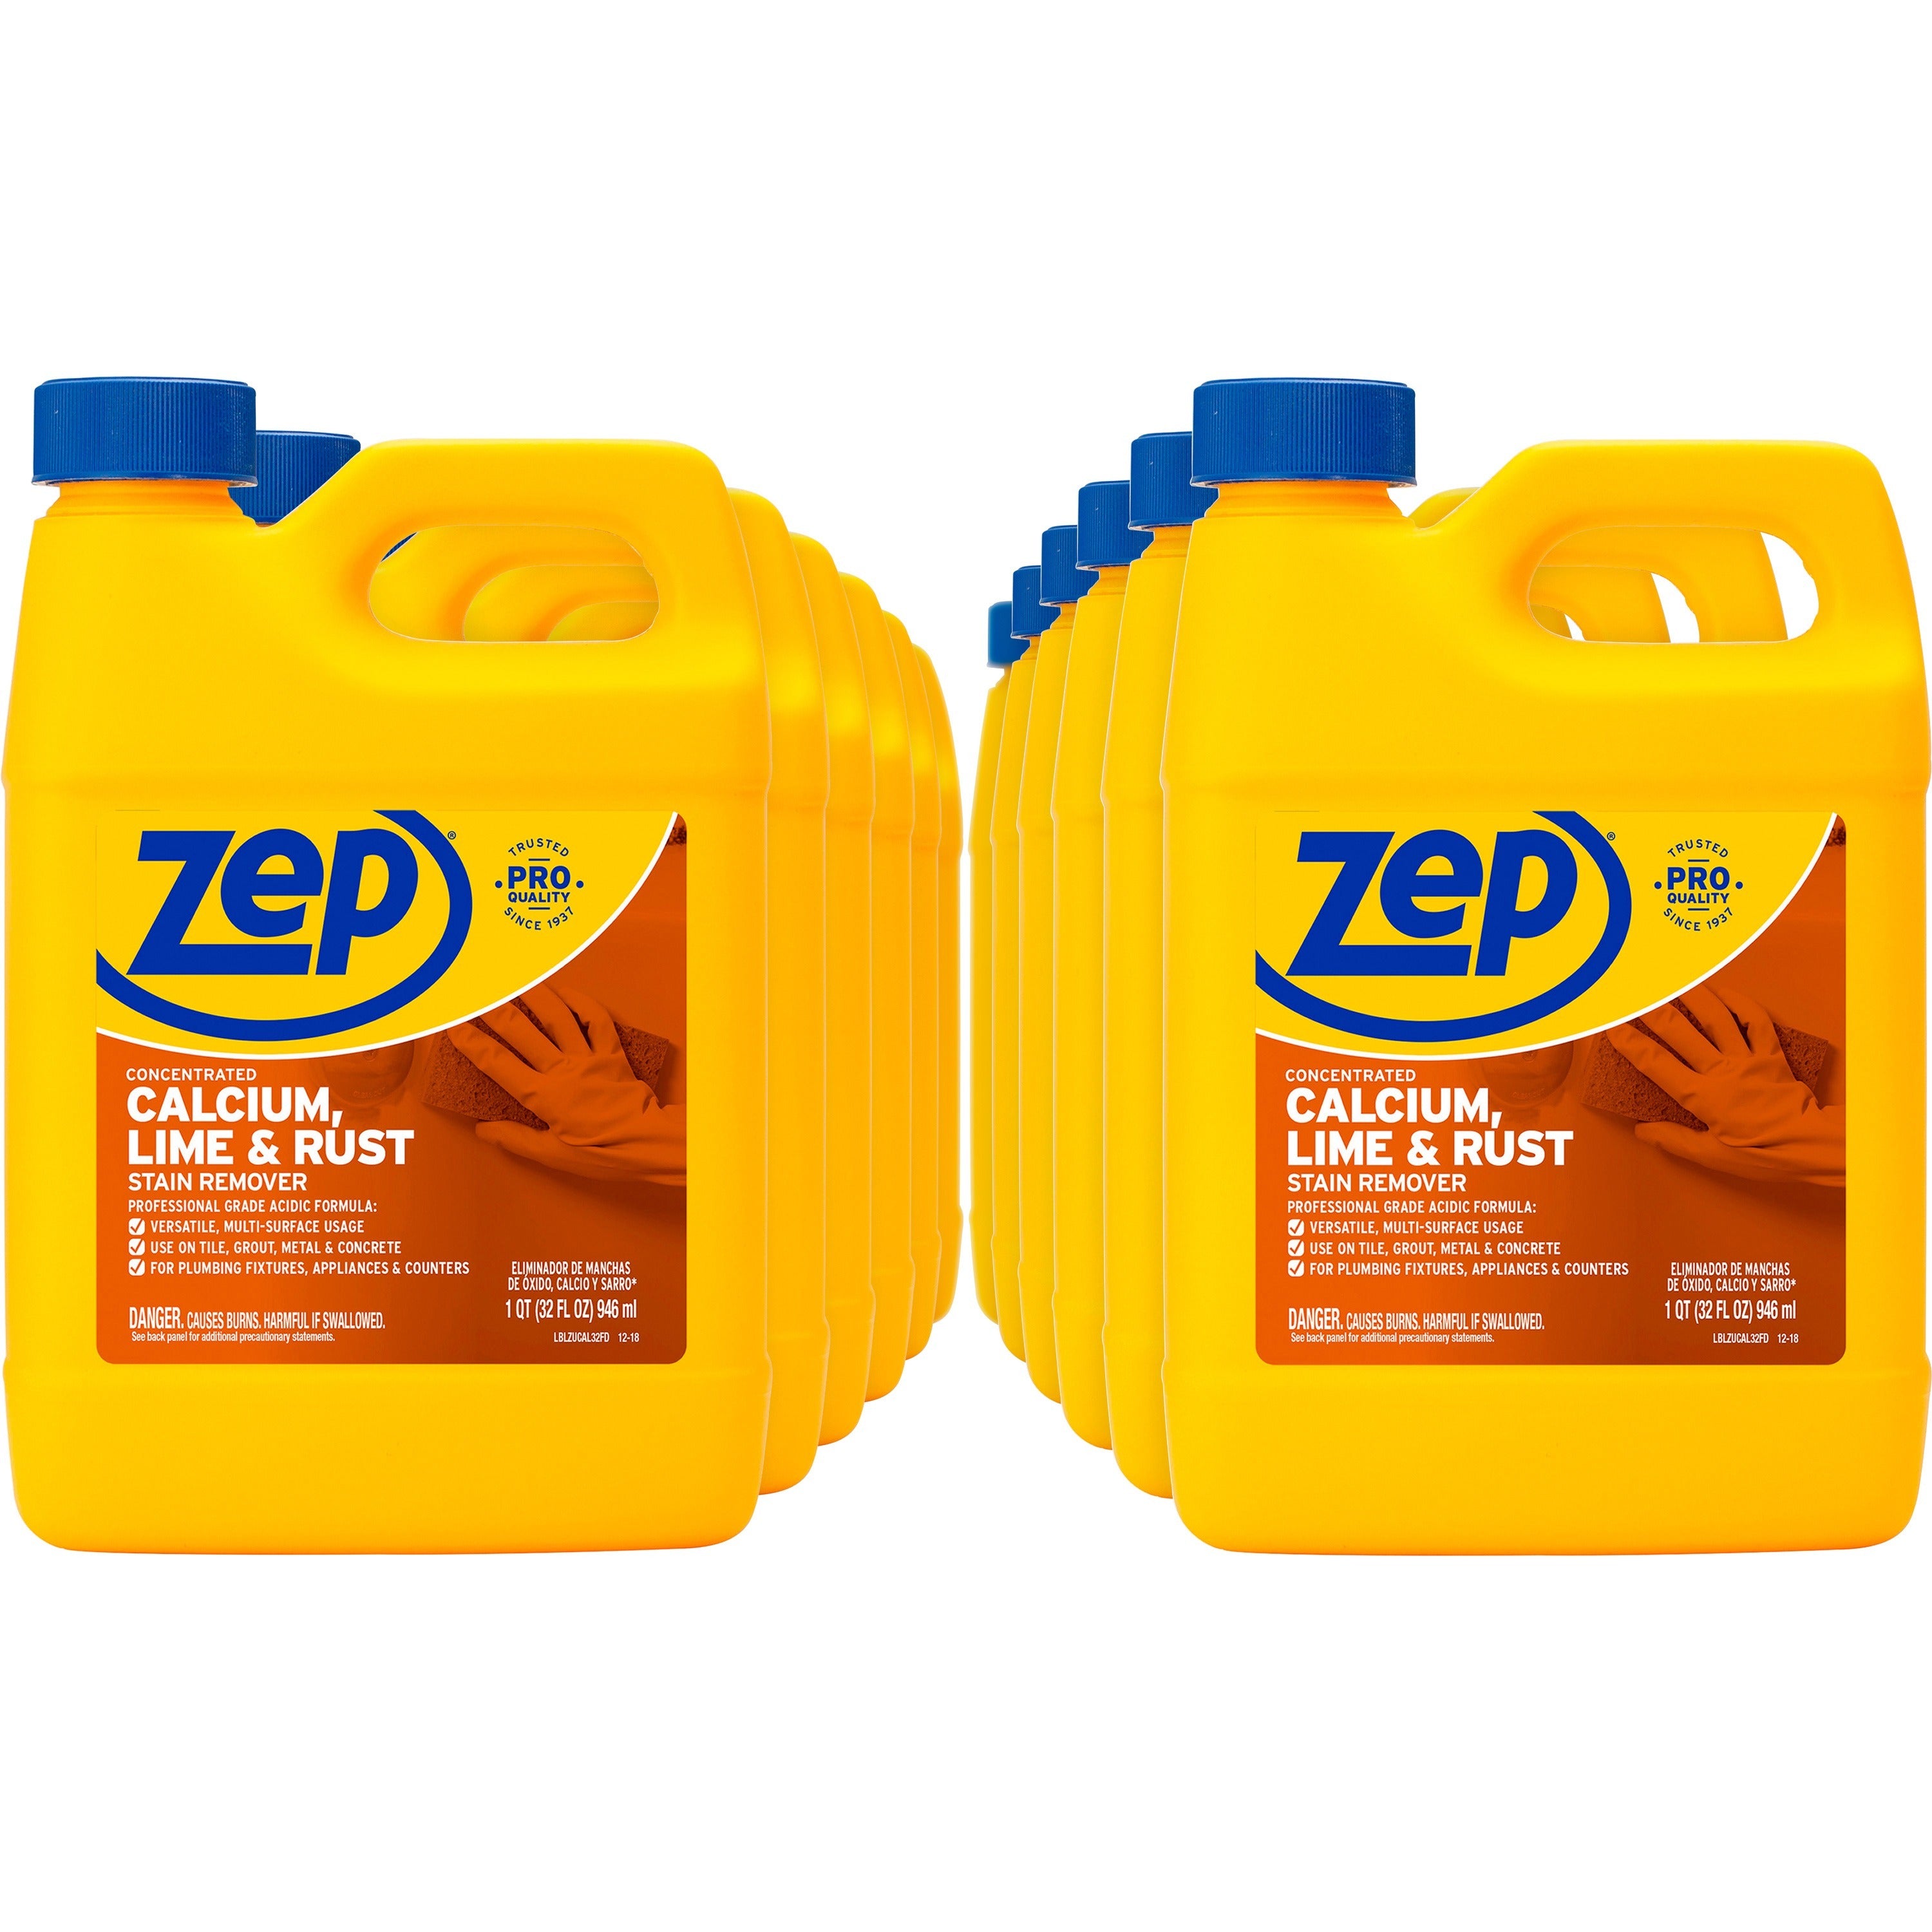 zep-calcium-lime-&-rust-stain-remover-concentrate-liquid-32-fl-oz-1-quart-1-each-yellow_zpezucal32 - 1